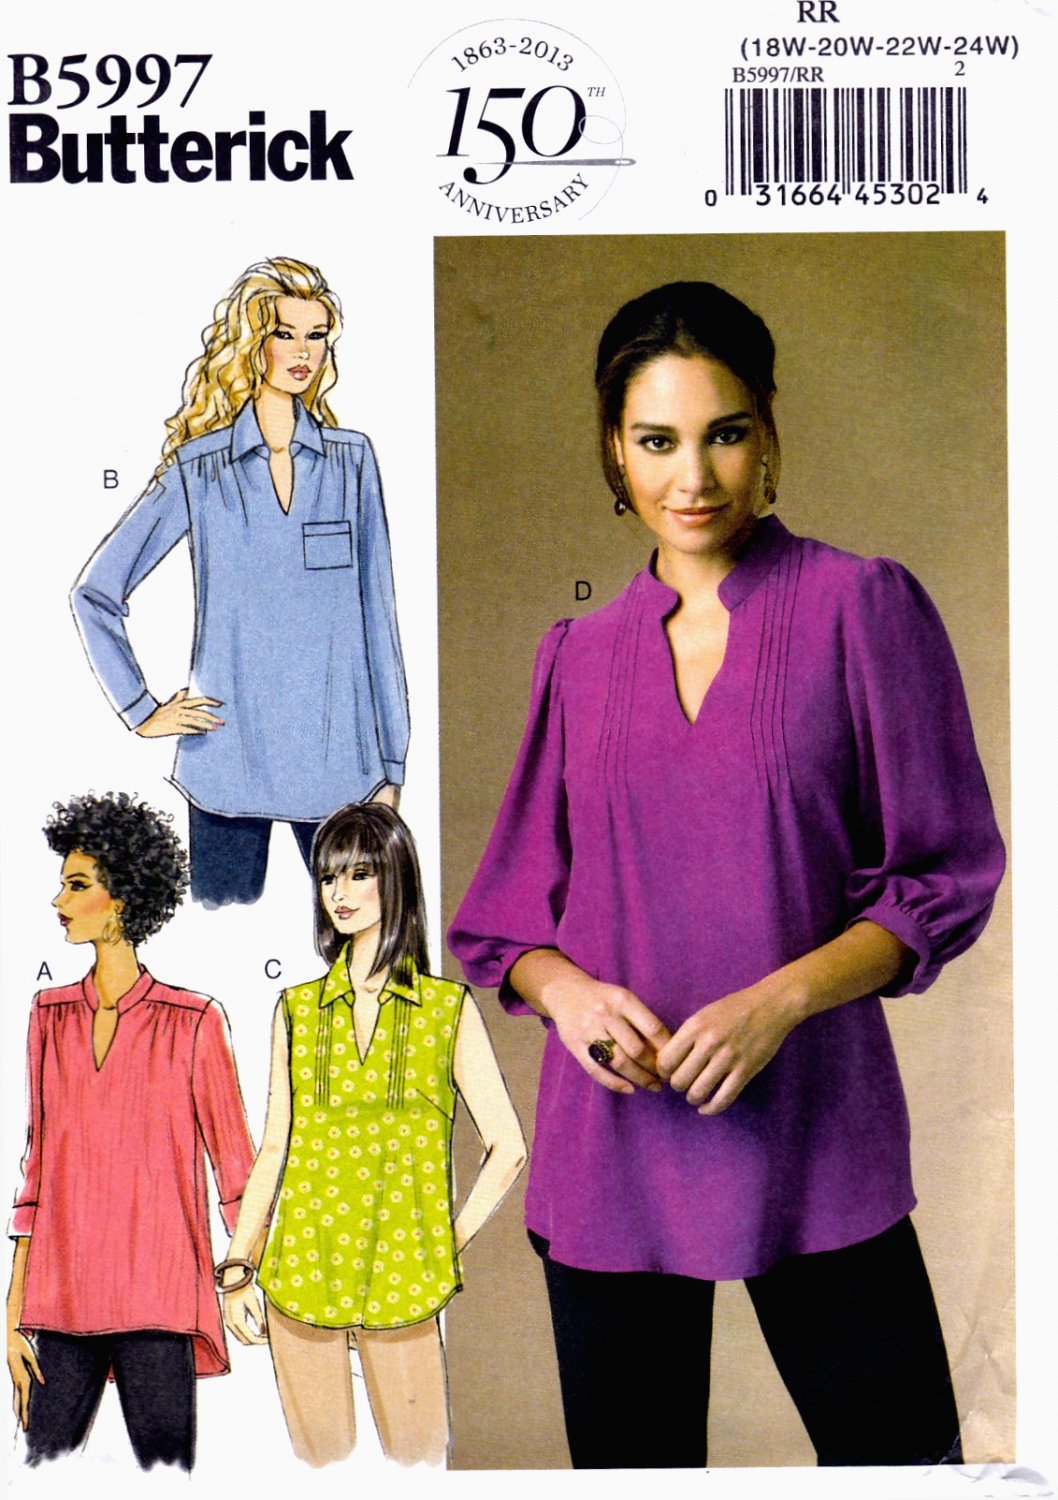 Butterick B5997 Misses Womens Tops Pullover Loose Fitting Sewing Pattern Sizes 18W-20W-22W-24W